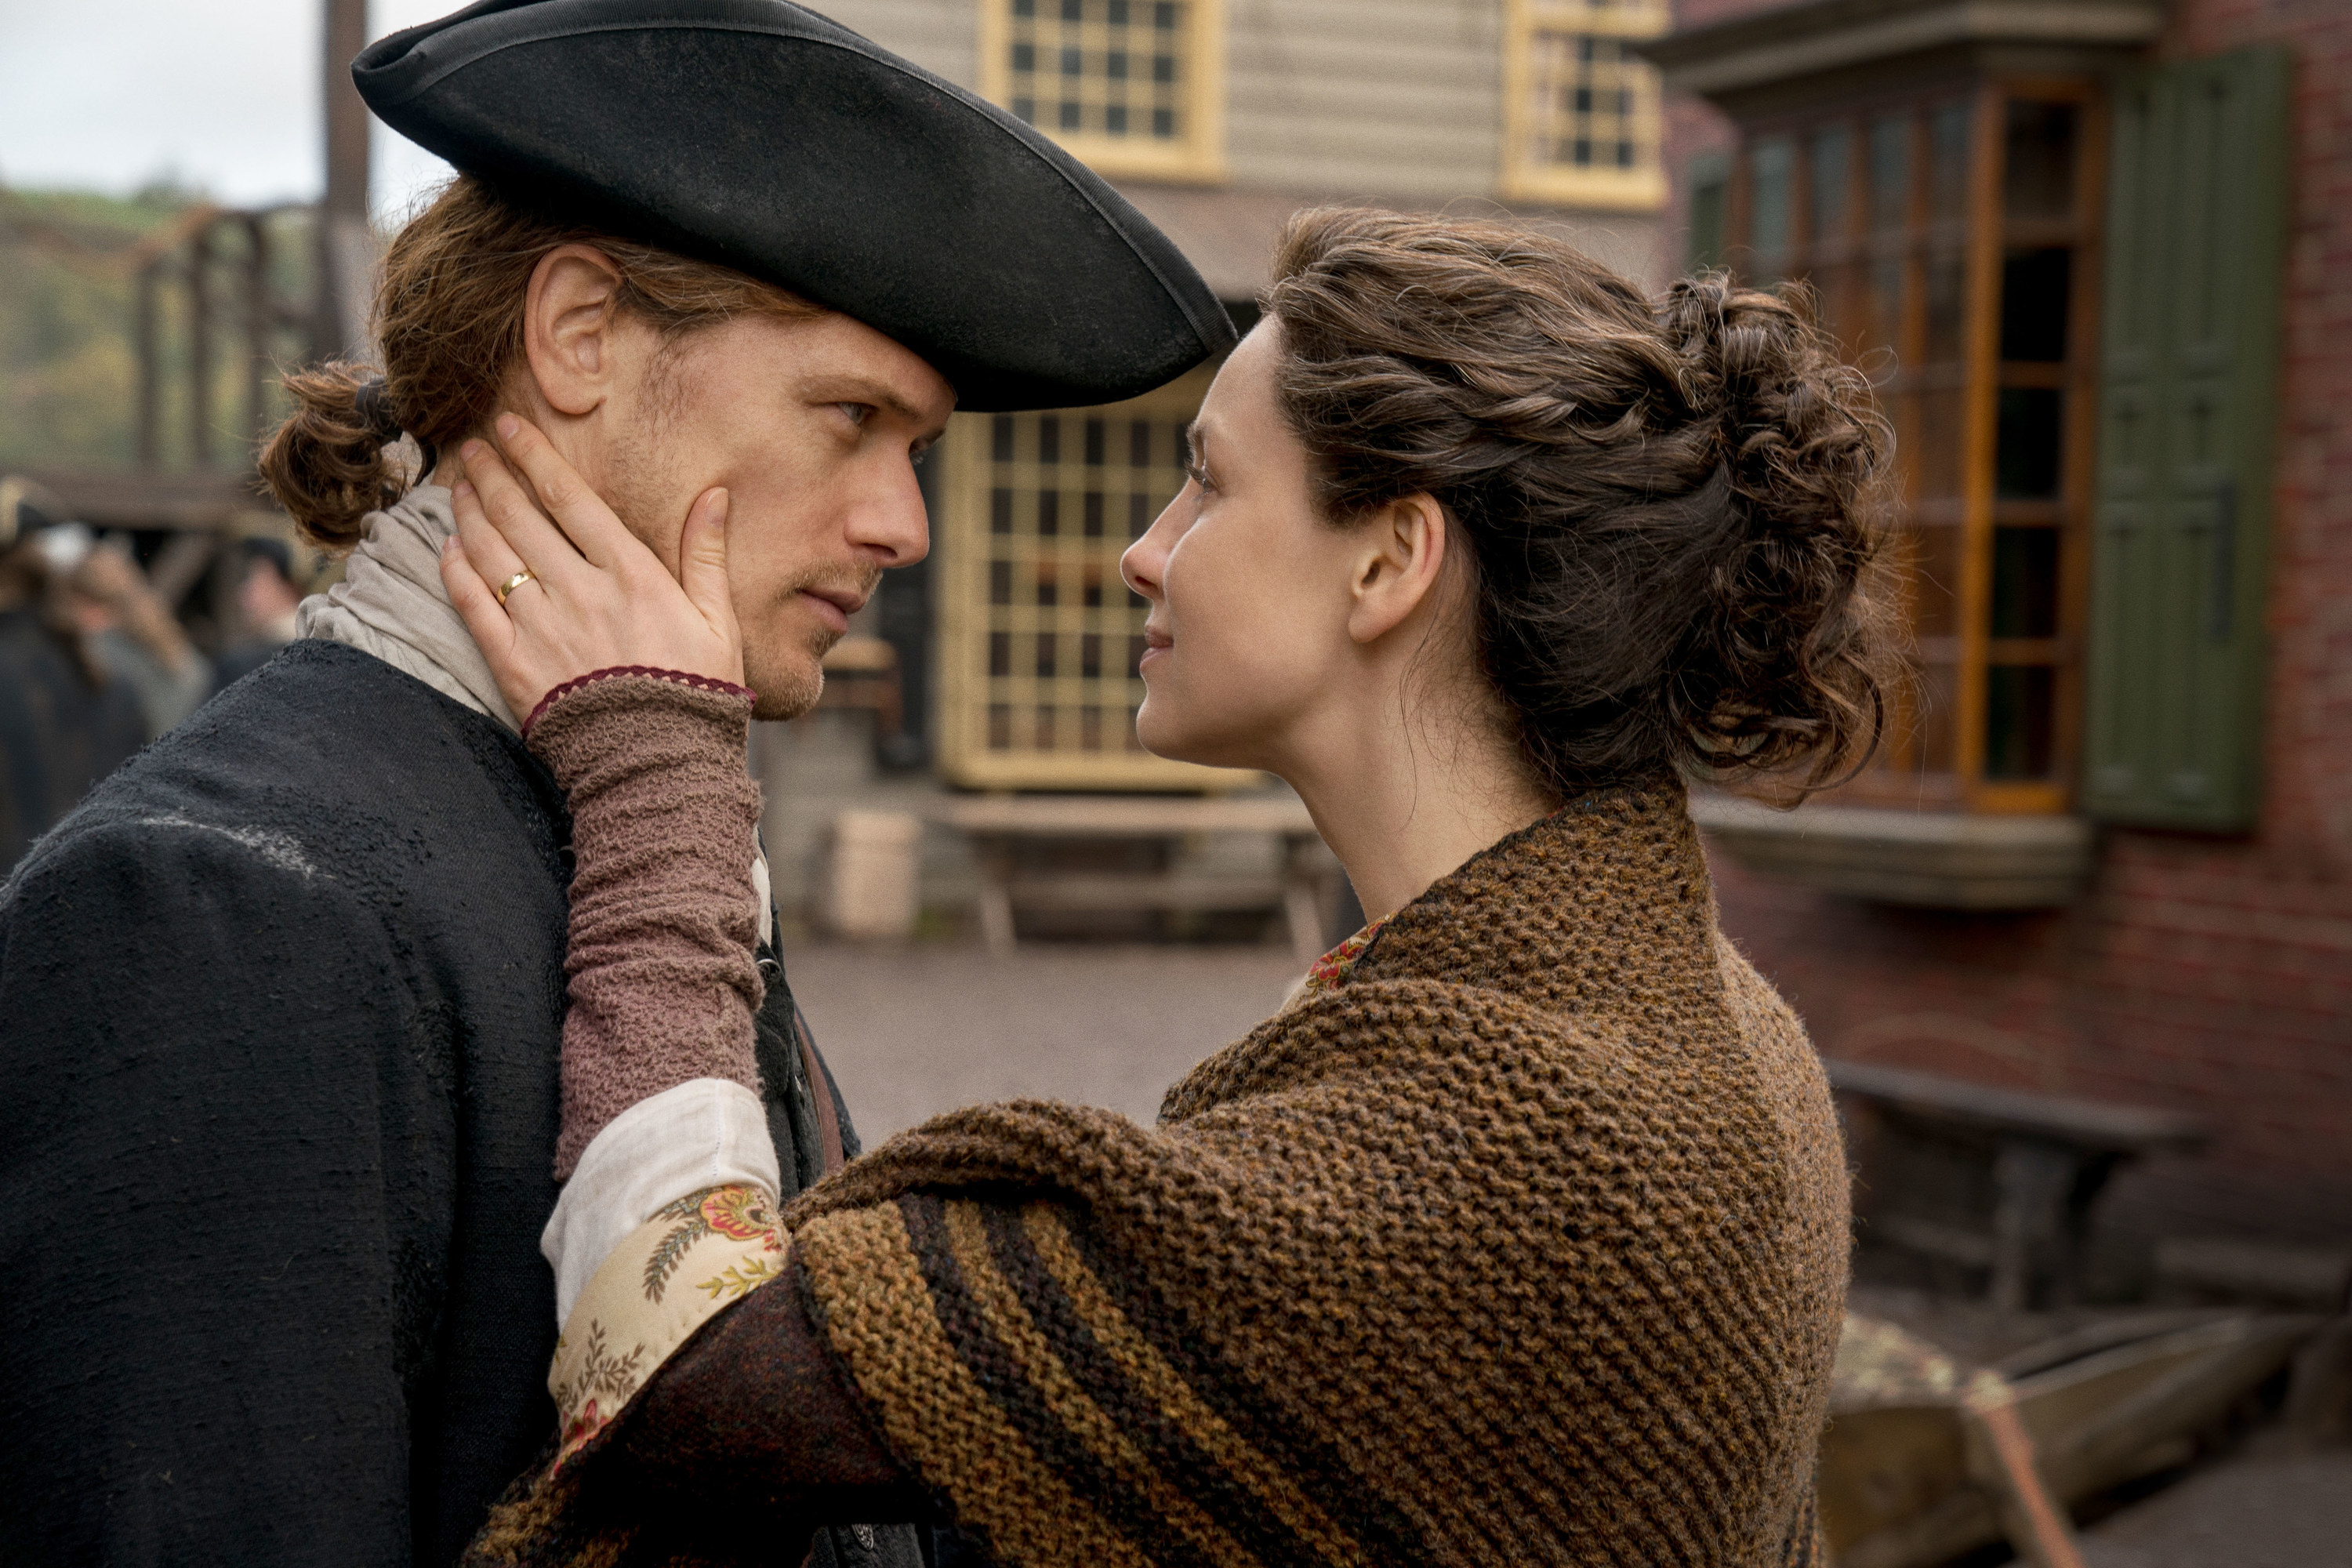 Claire Beauchamp Fraser holds the face of her husband, James